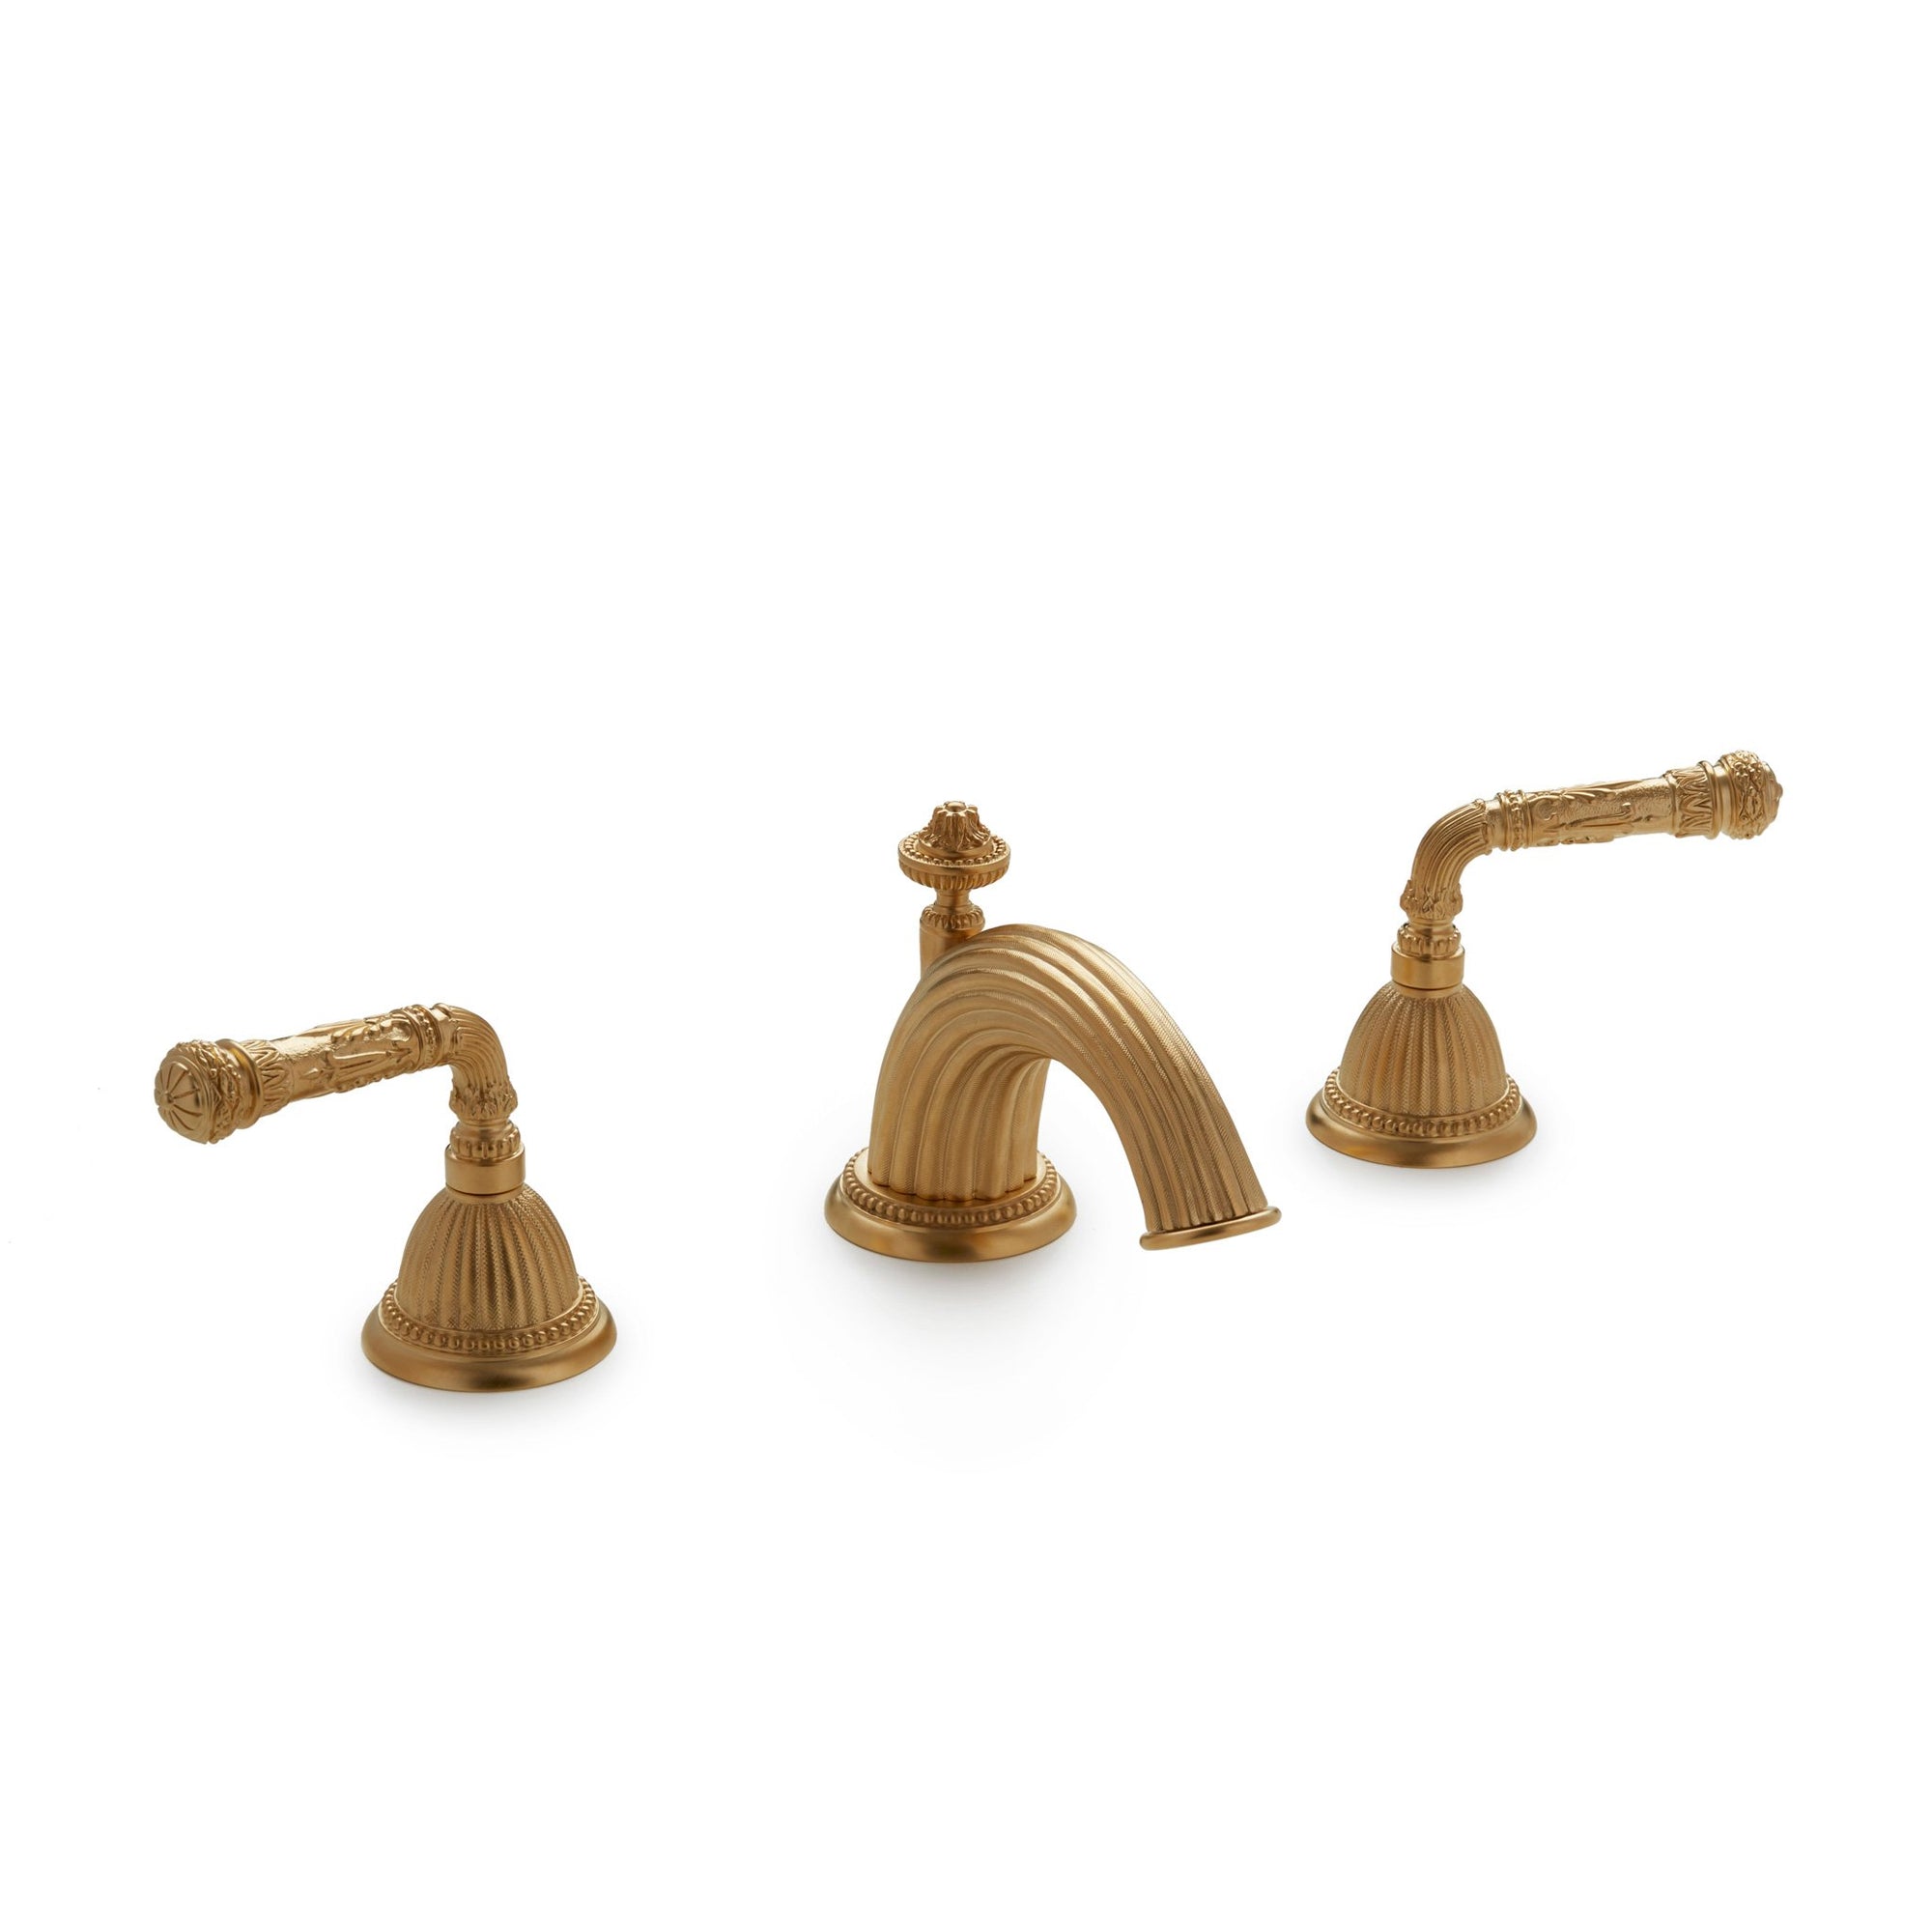 1025BSN-GP Sherle Wagner International Empire Lever Faucet Set in Gold Plate metal finish